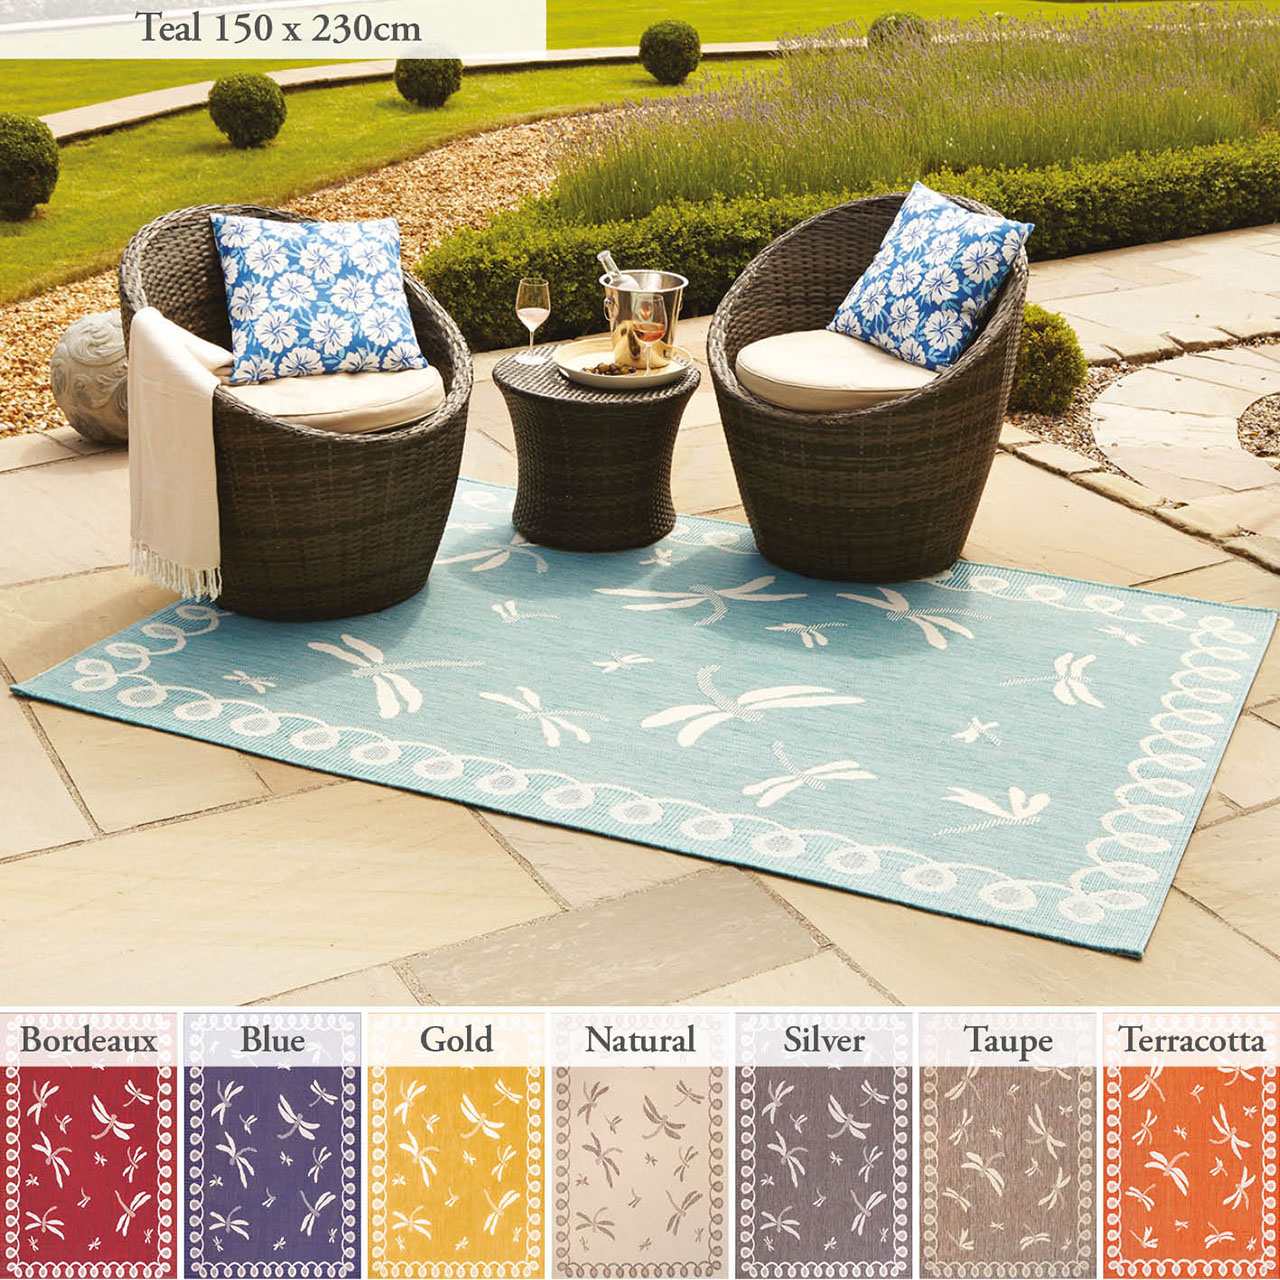 Dragonfly Outdoor Rug